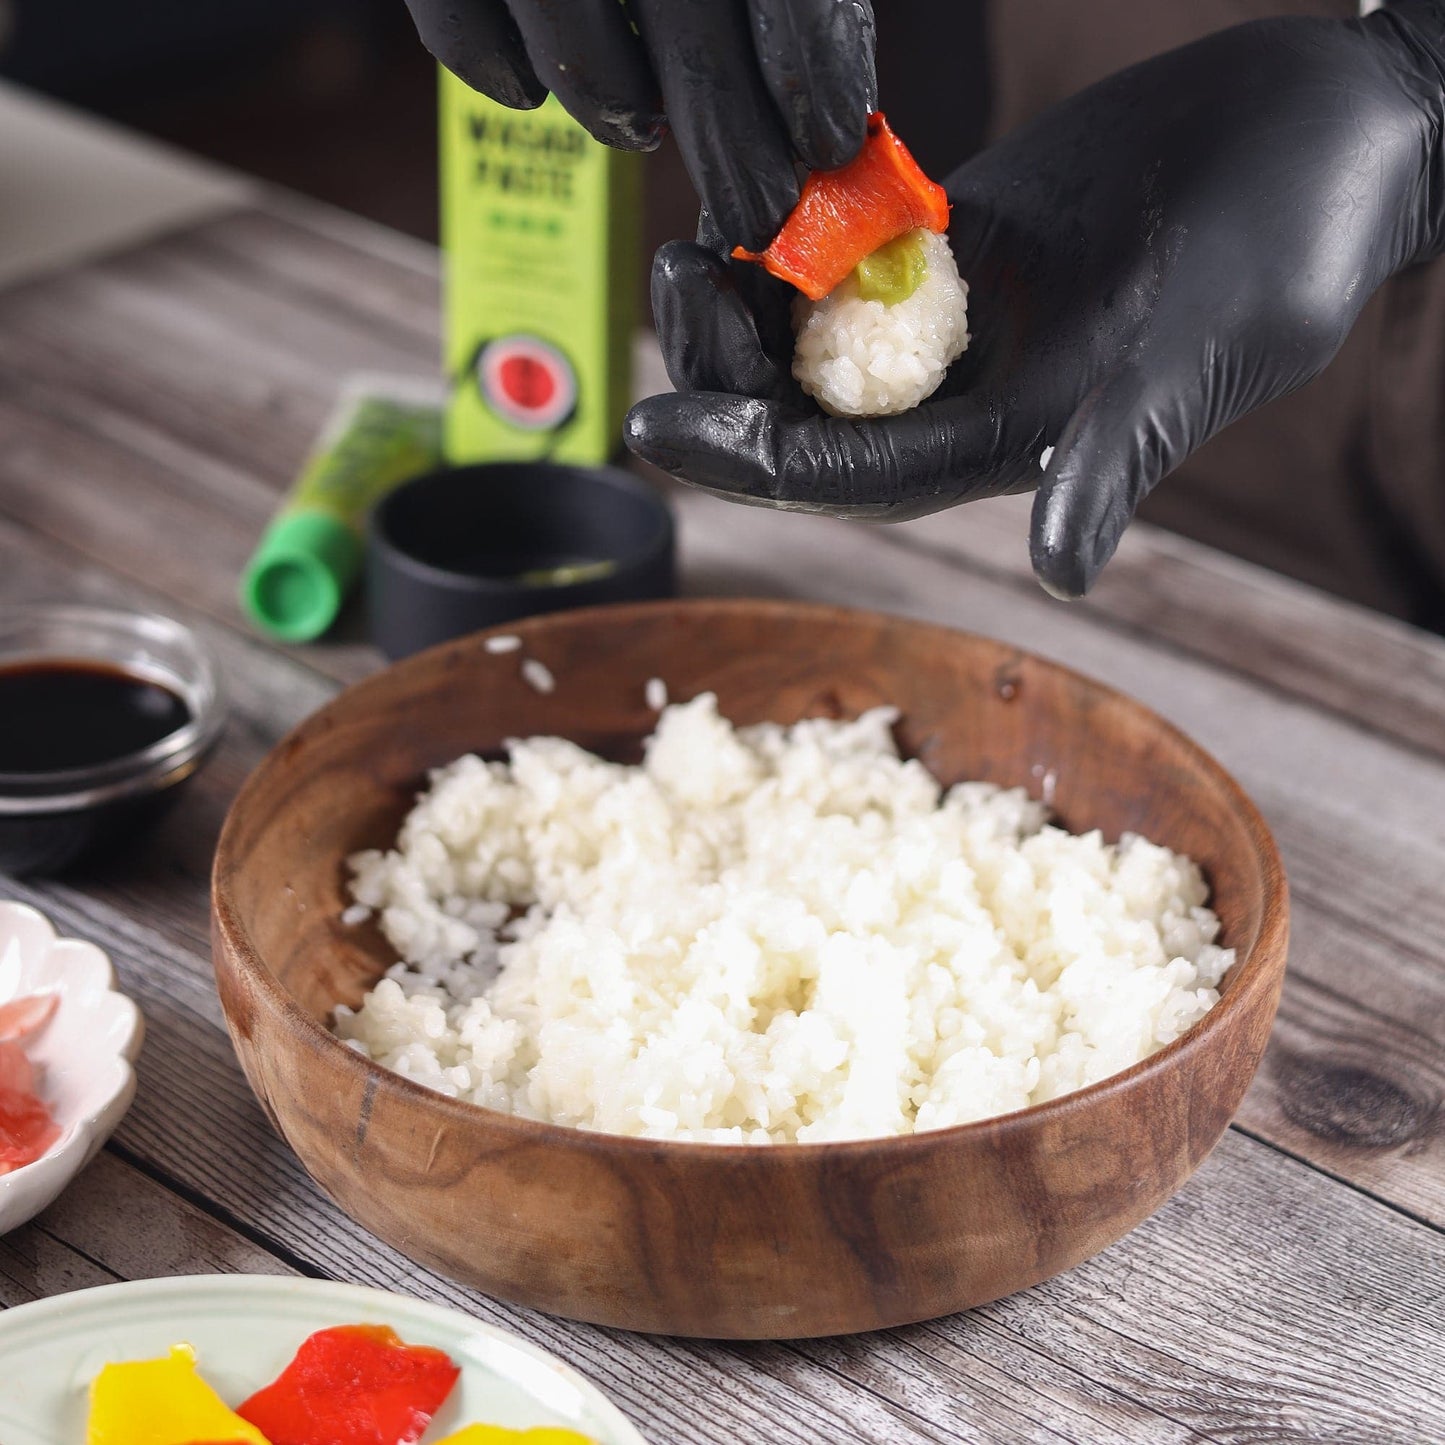 Urban Platter Premium Wasabi Paste, 43g (Elevate Your Sushi Experience with Lingering Zing)